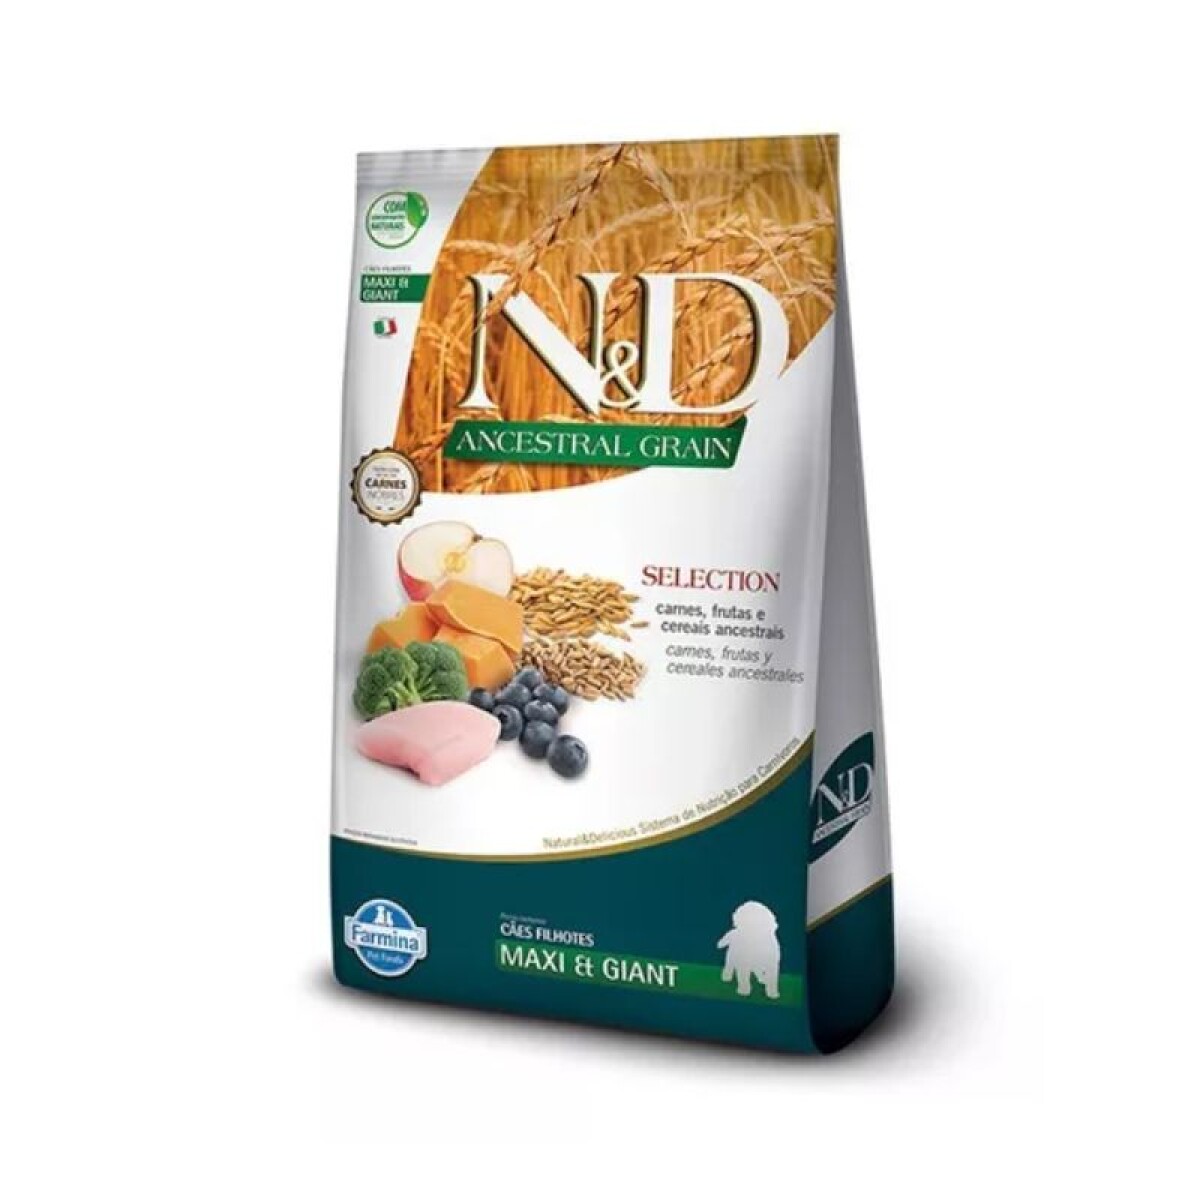 ND ANCESTRAL CAN PUPPY MAX 15 KG - Nd Ancestral Can Puppy Max 15 Kg 